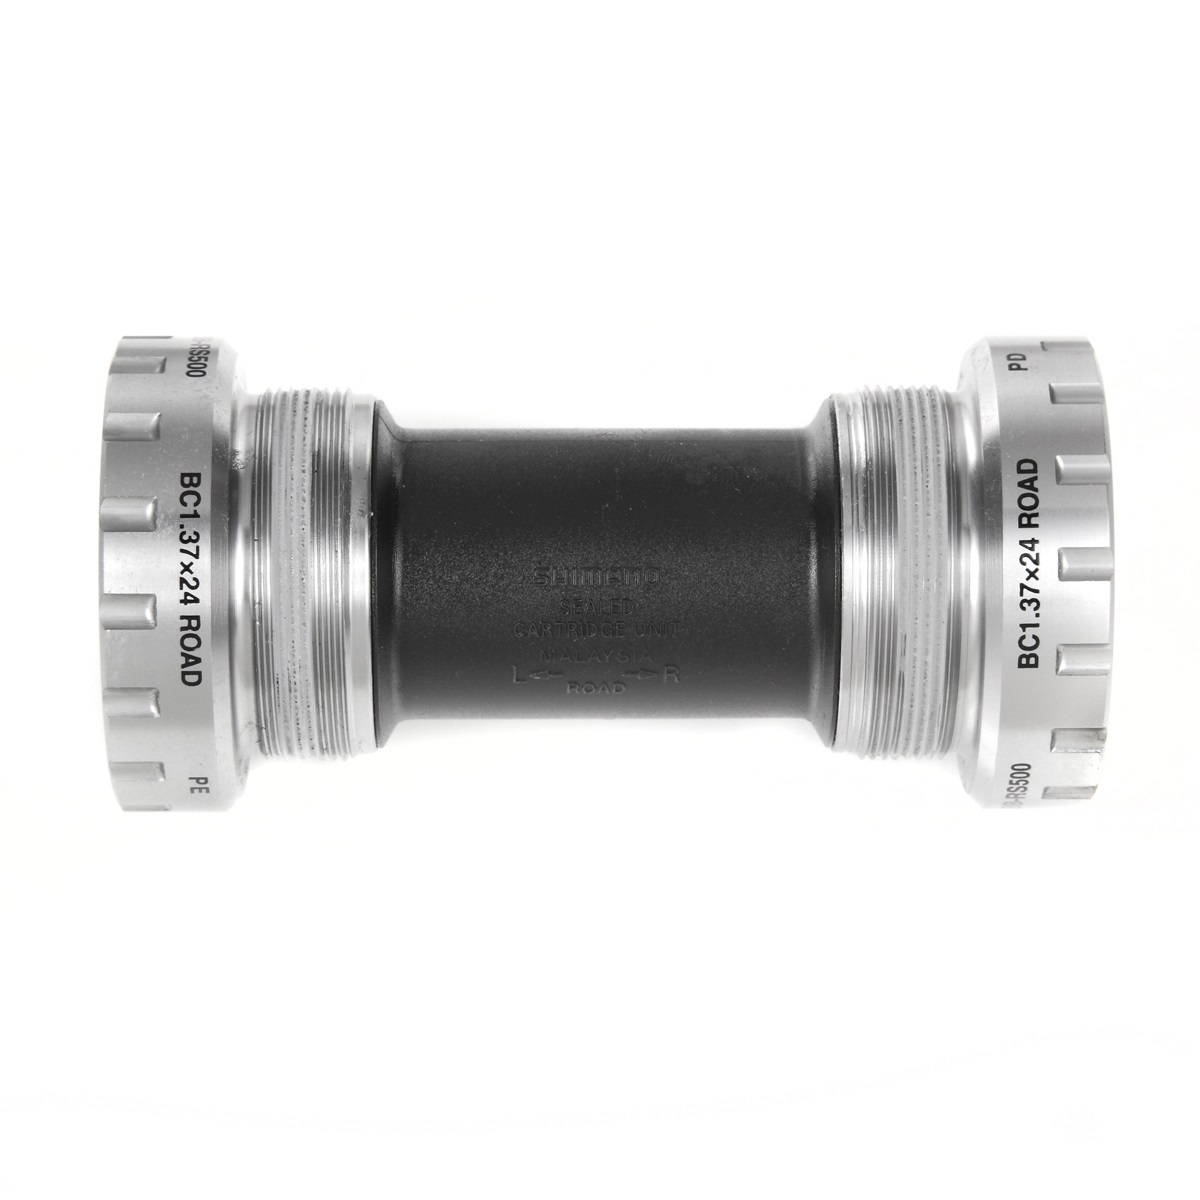 Shimano BB-RS500 vevlager